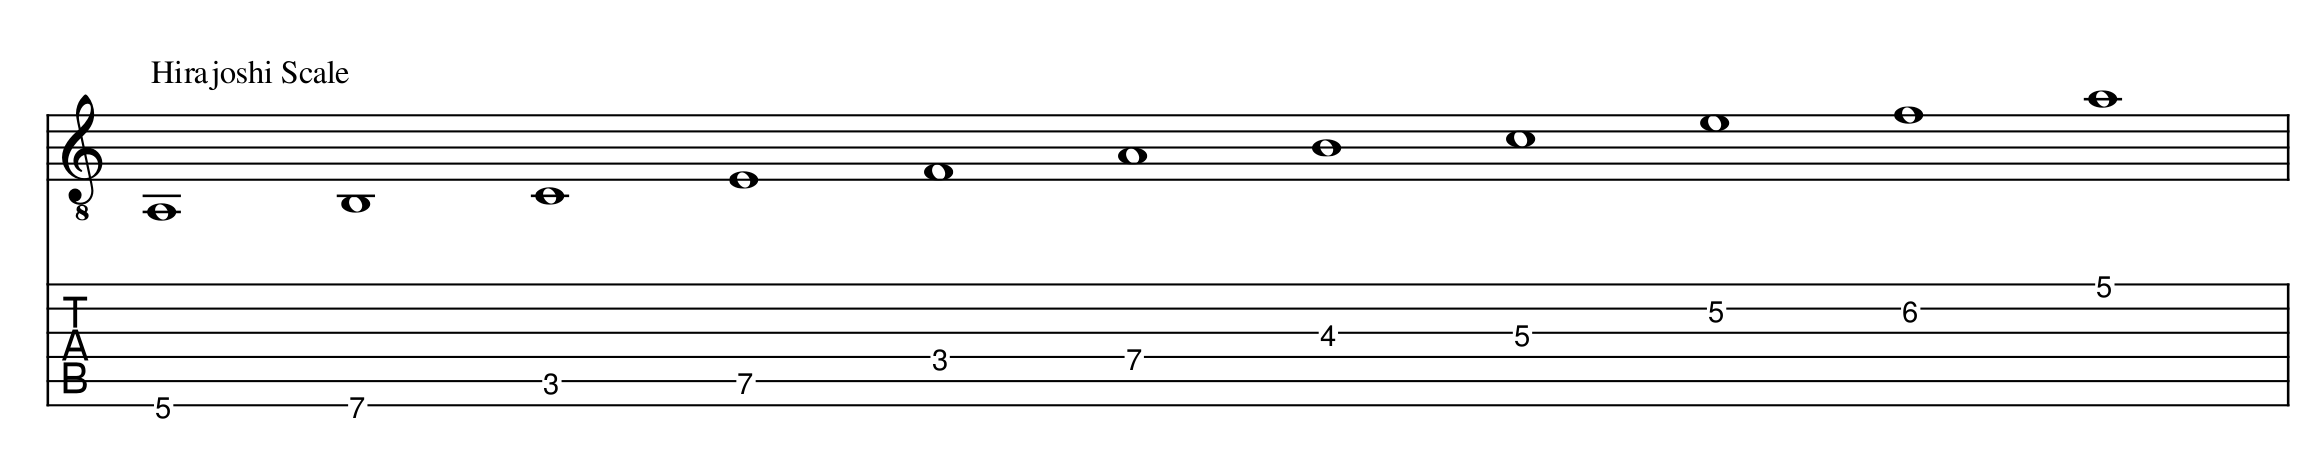 The hirajoshi scale - notes and tablature